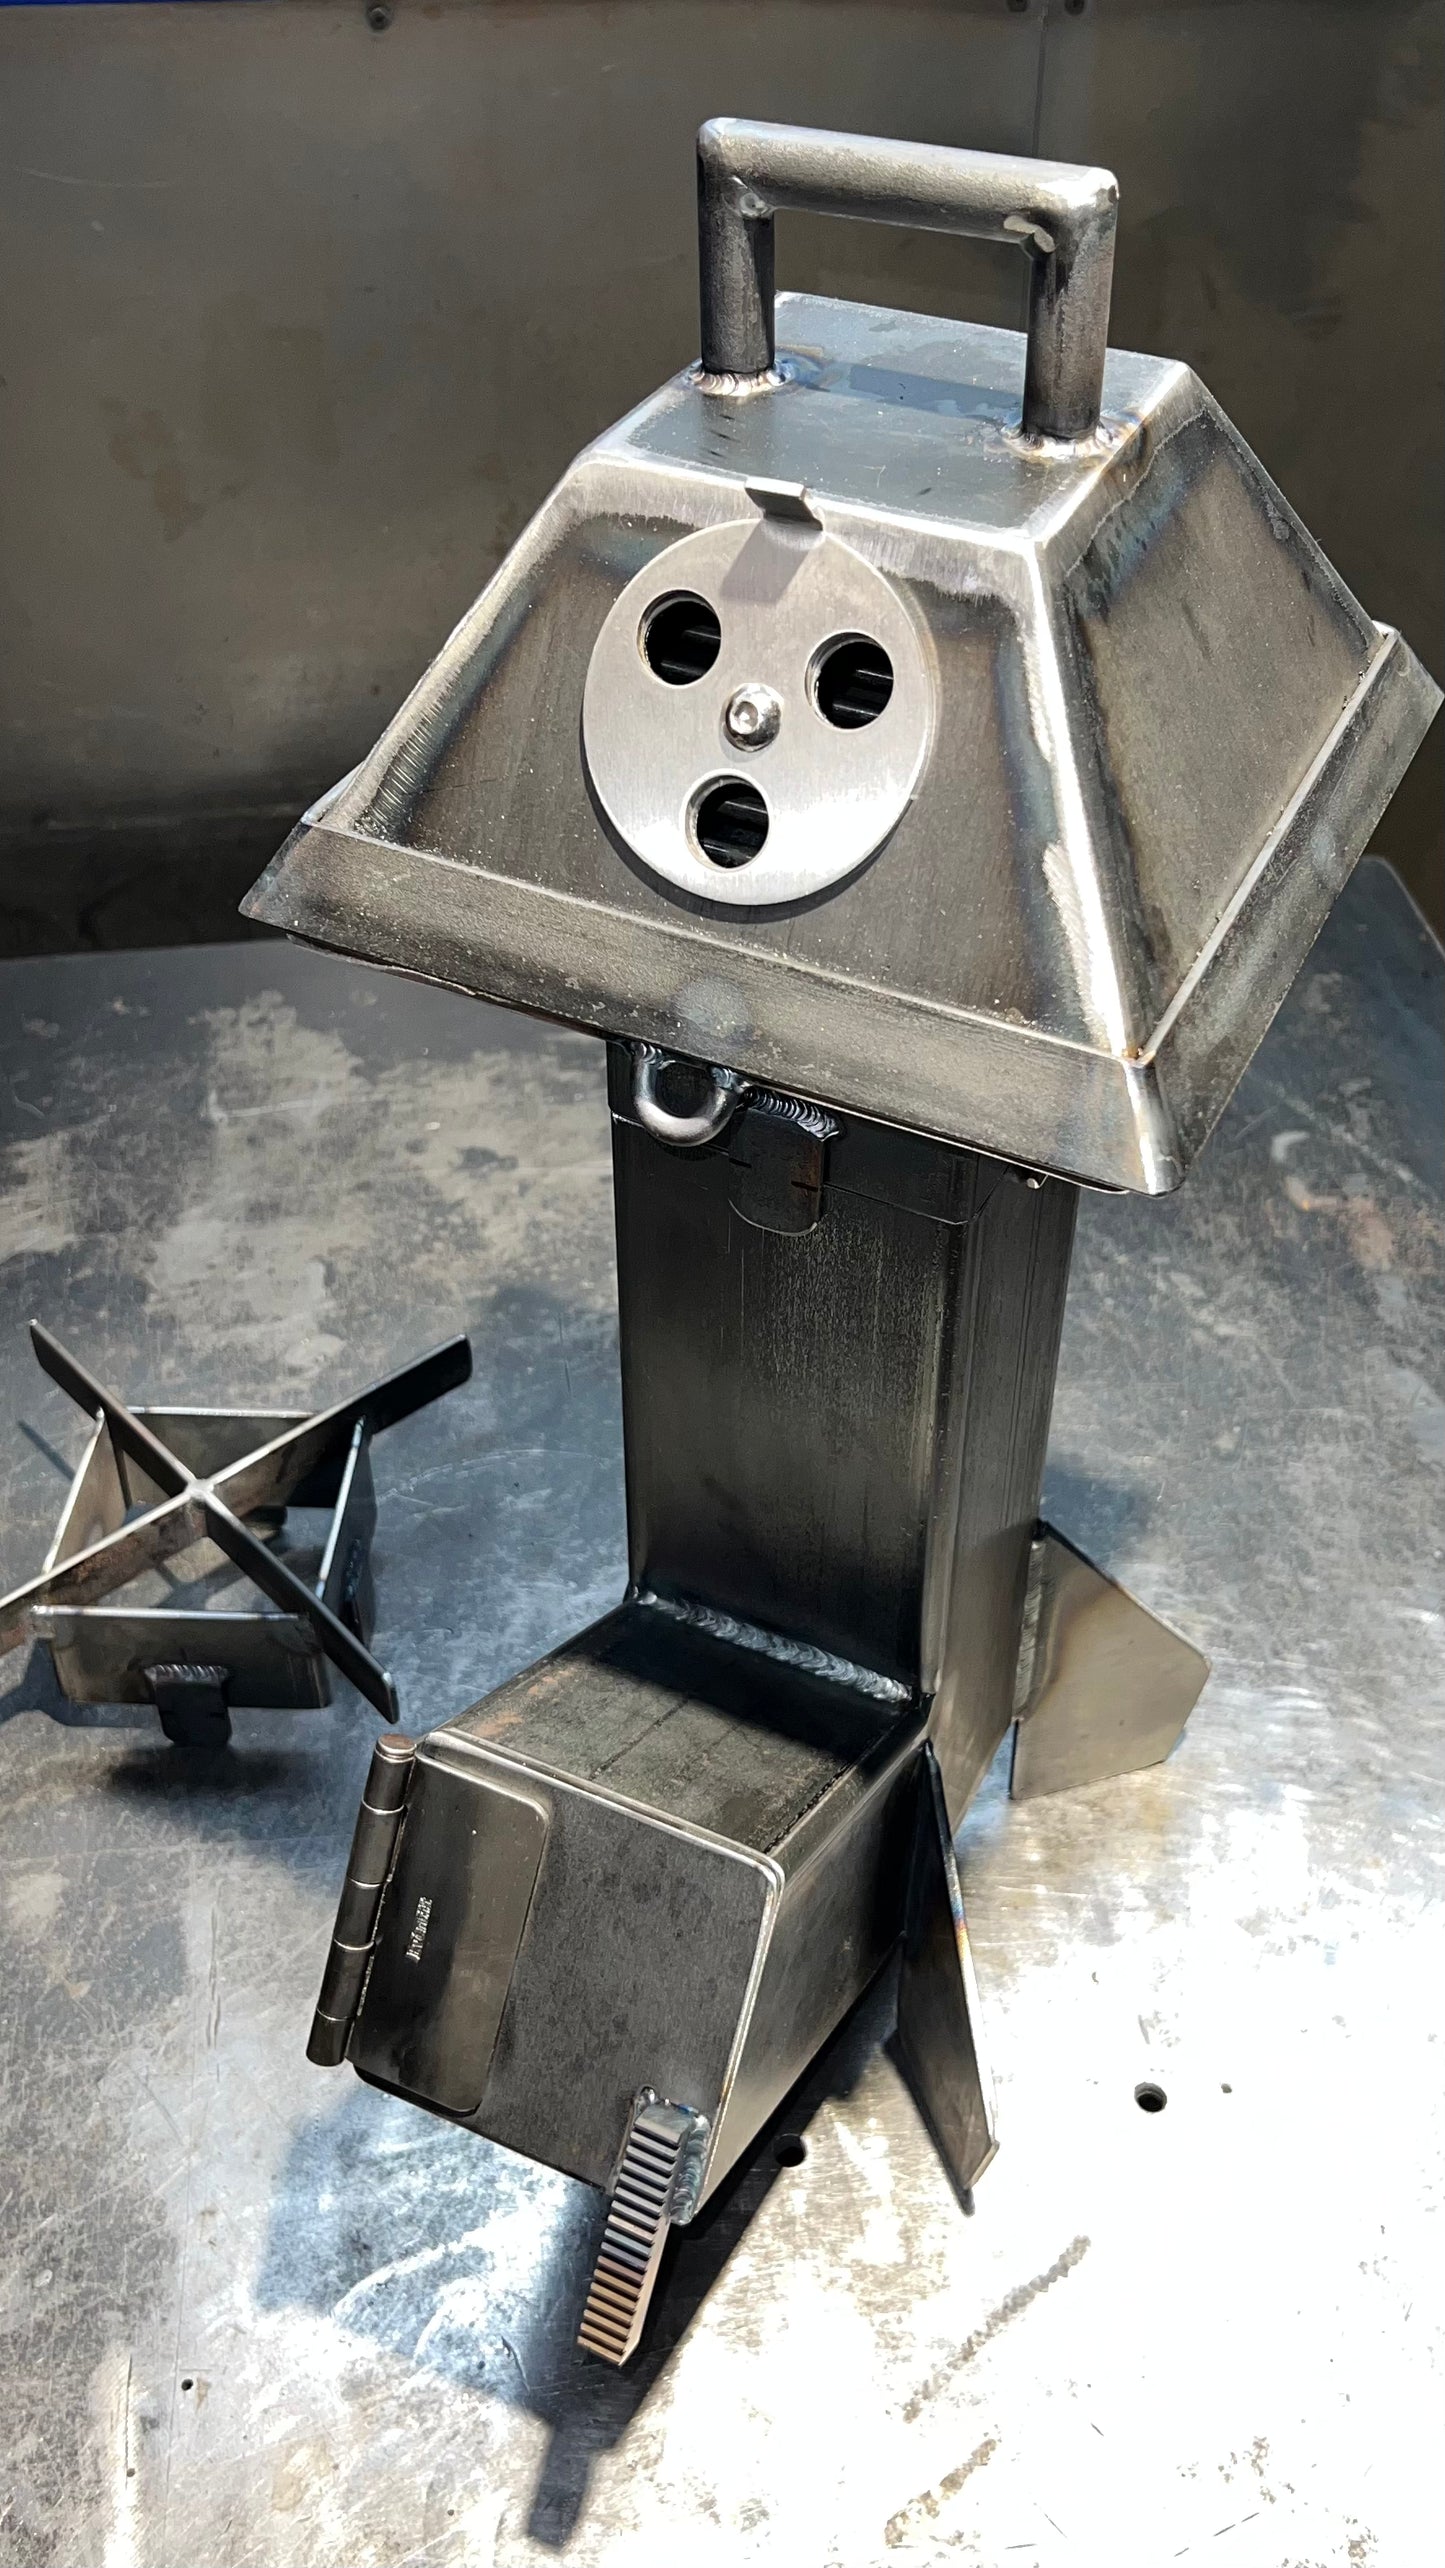 Stainless Steel Rocket Stove Accessory, Grill Top Grate and Reducer stove  Sold Separately 